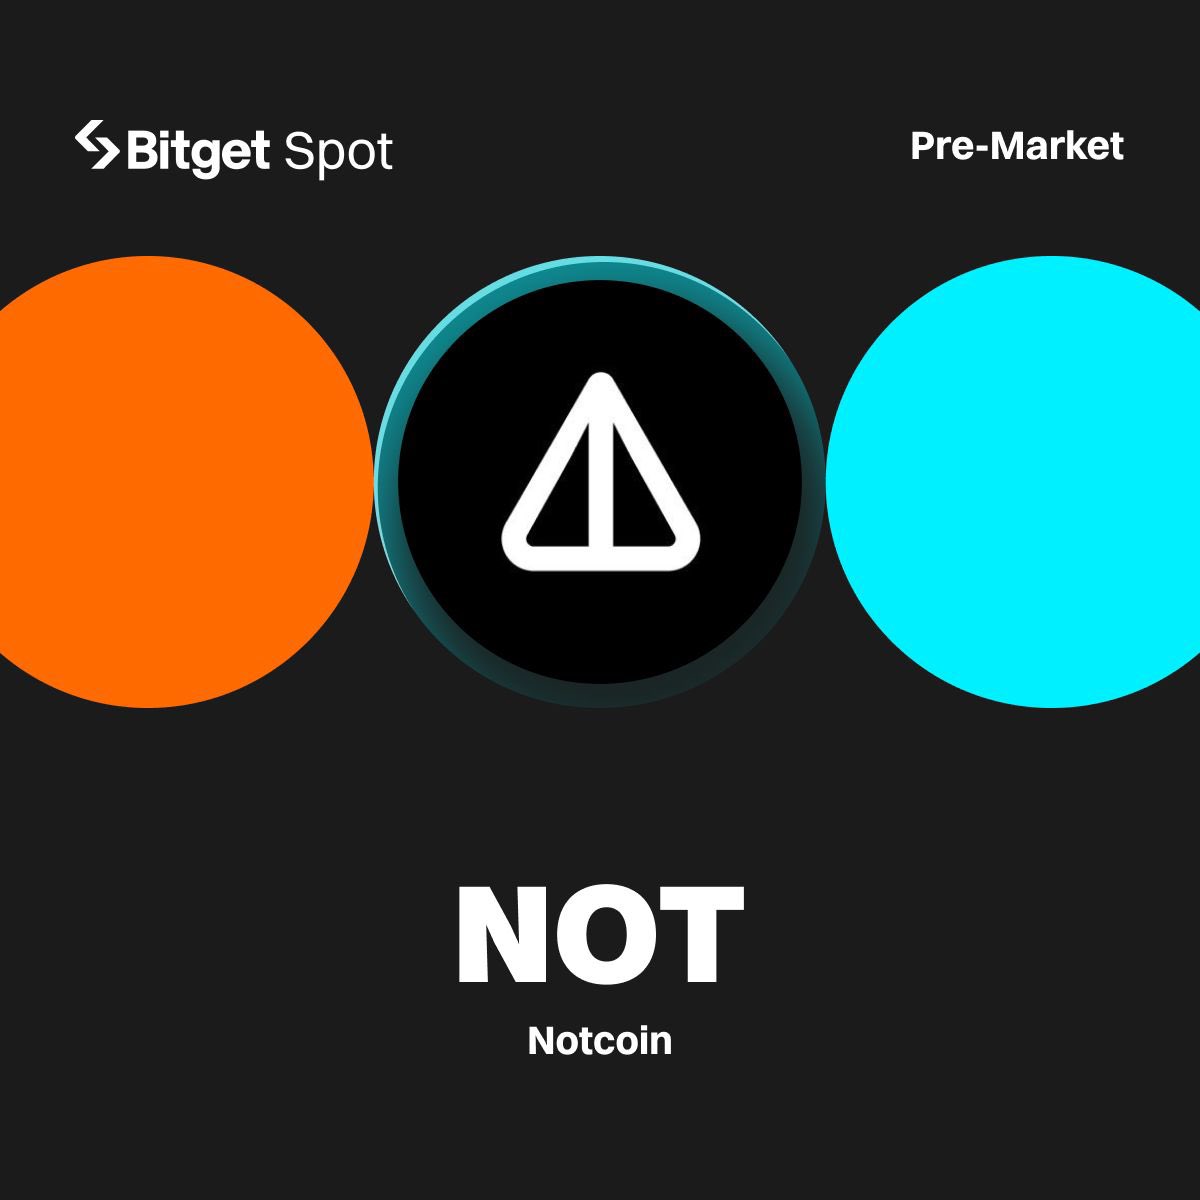 INFO 🚨 Bitget is listing NOT on it’s pre-market trading and users can trade NOT before it is listed on the spot. Bitget premarket let you buy coins before they become popular which simply means it’s an Over the counter(OTC) Get started & register : partner.bitget.com/bg/6290NF